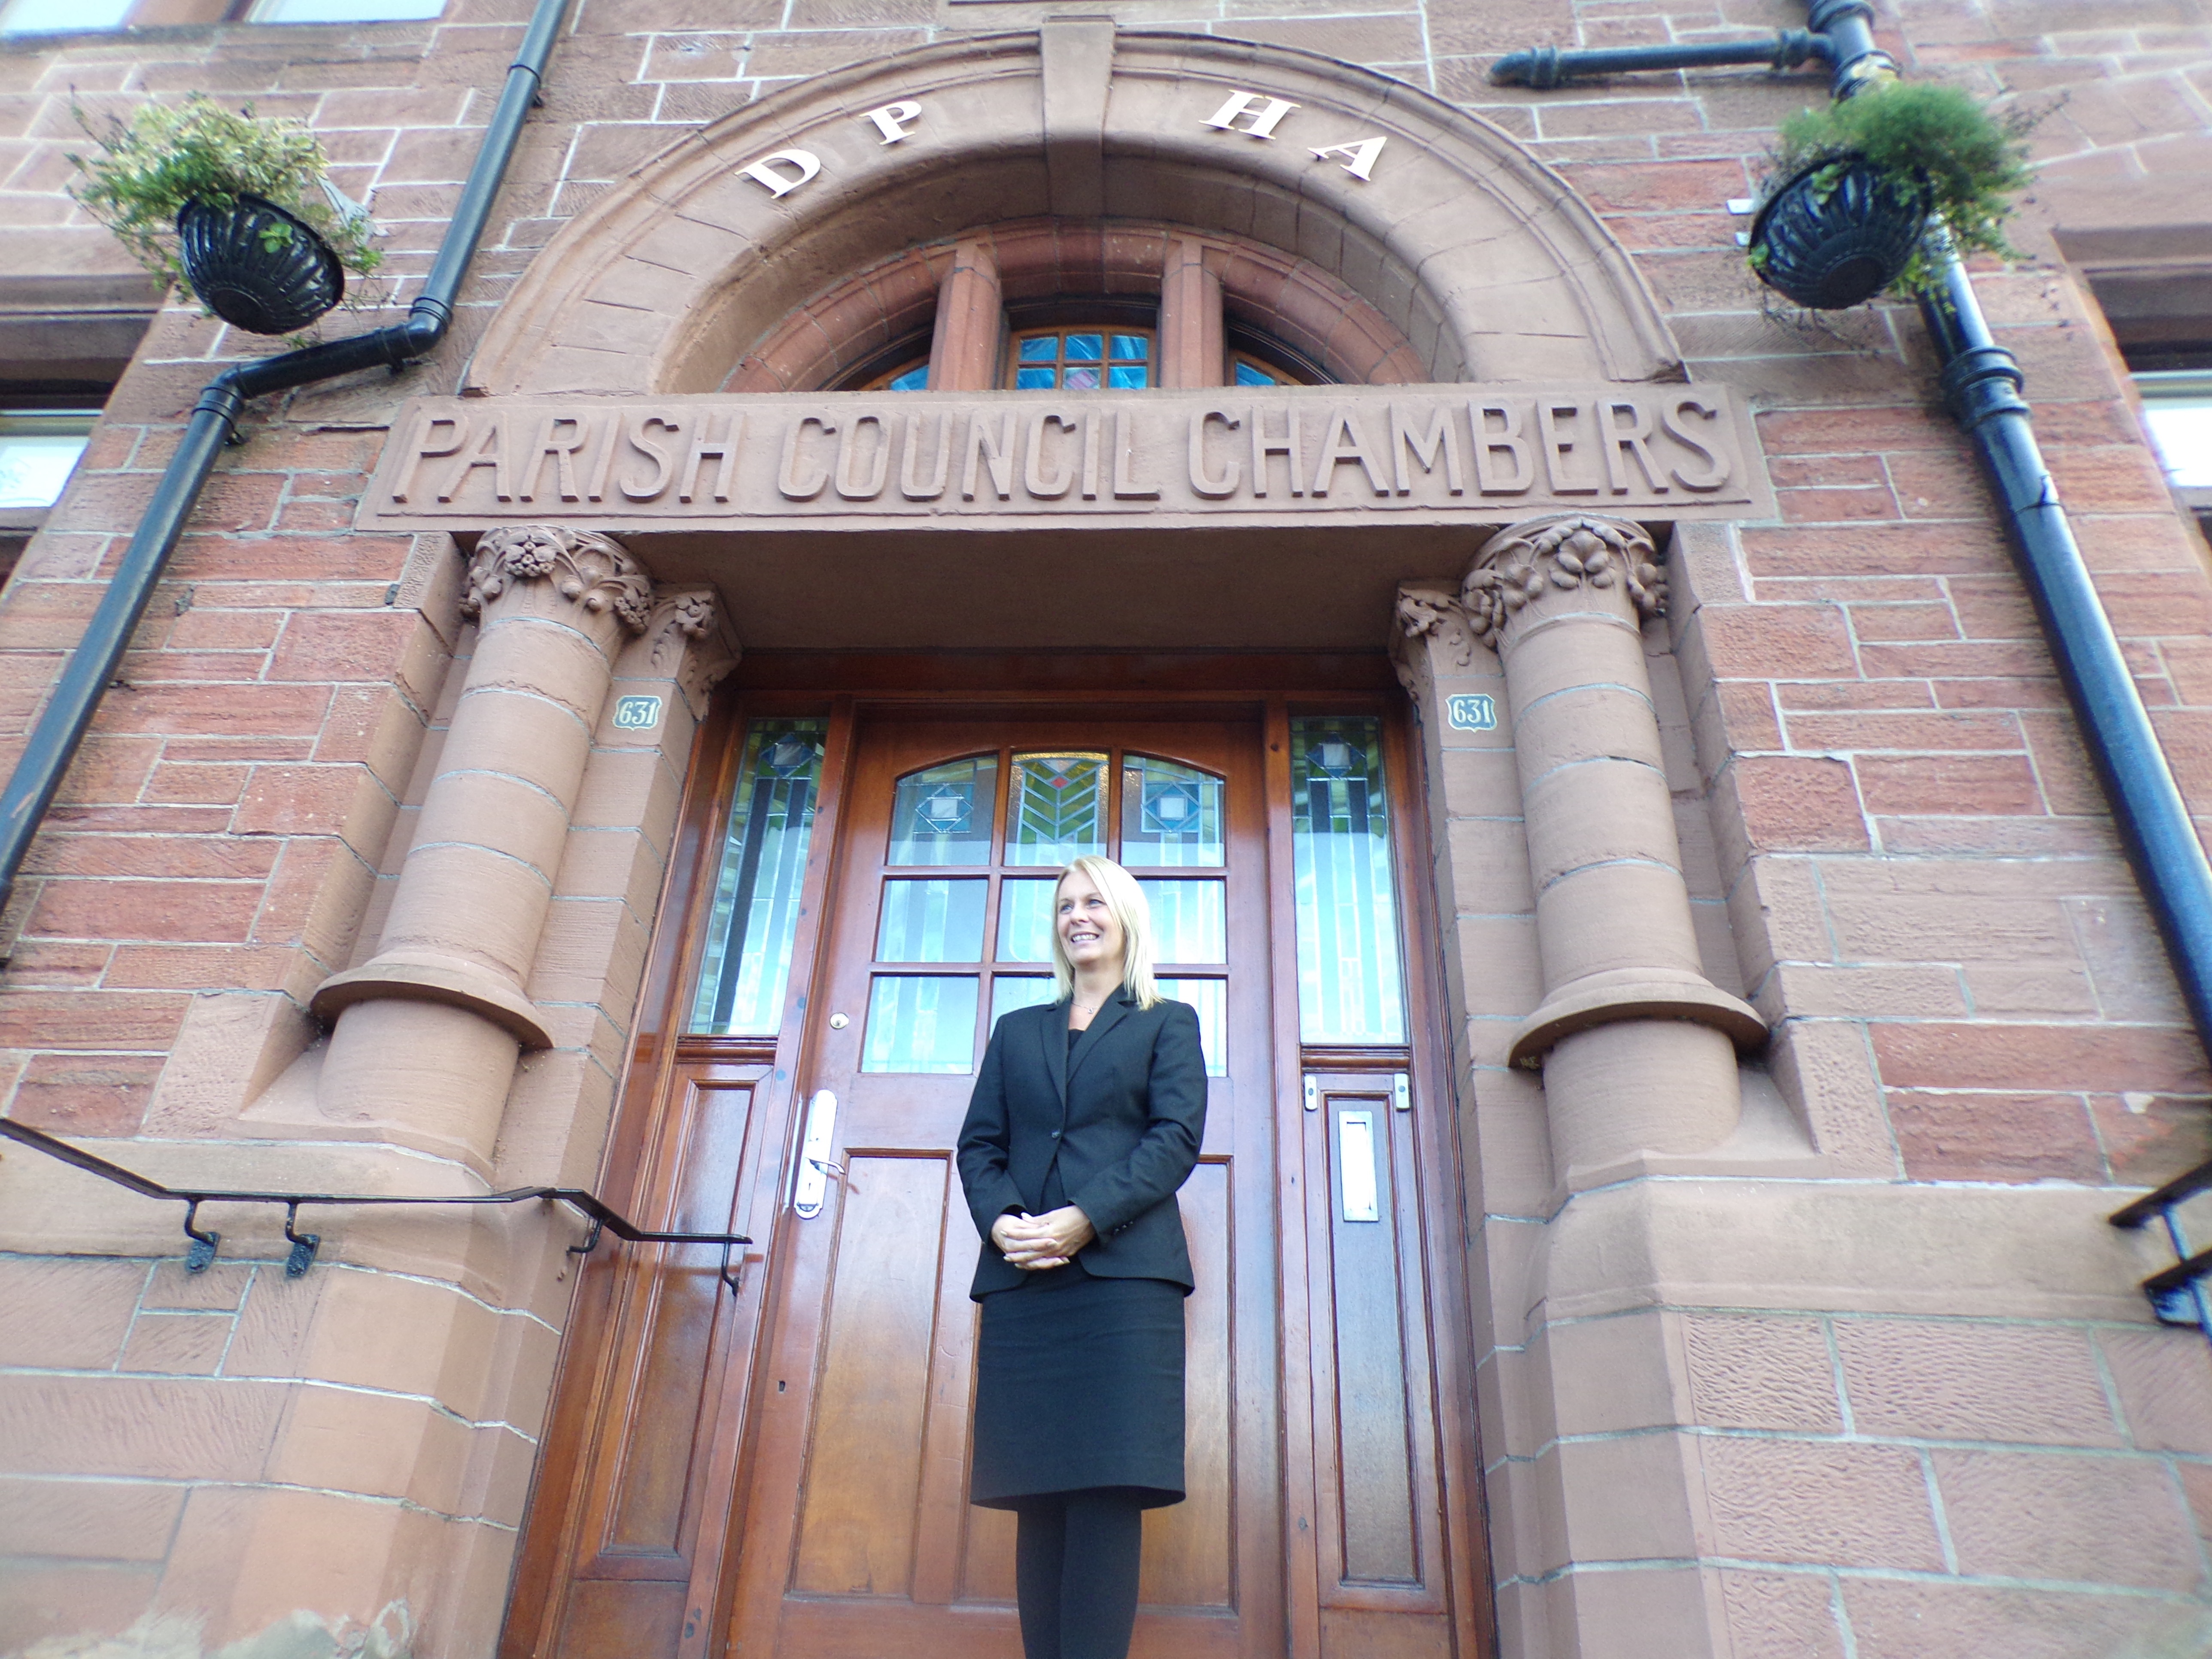 Dalmuir Park Housing Association appoints Anne Marie Brown as chief executive